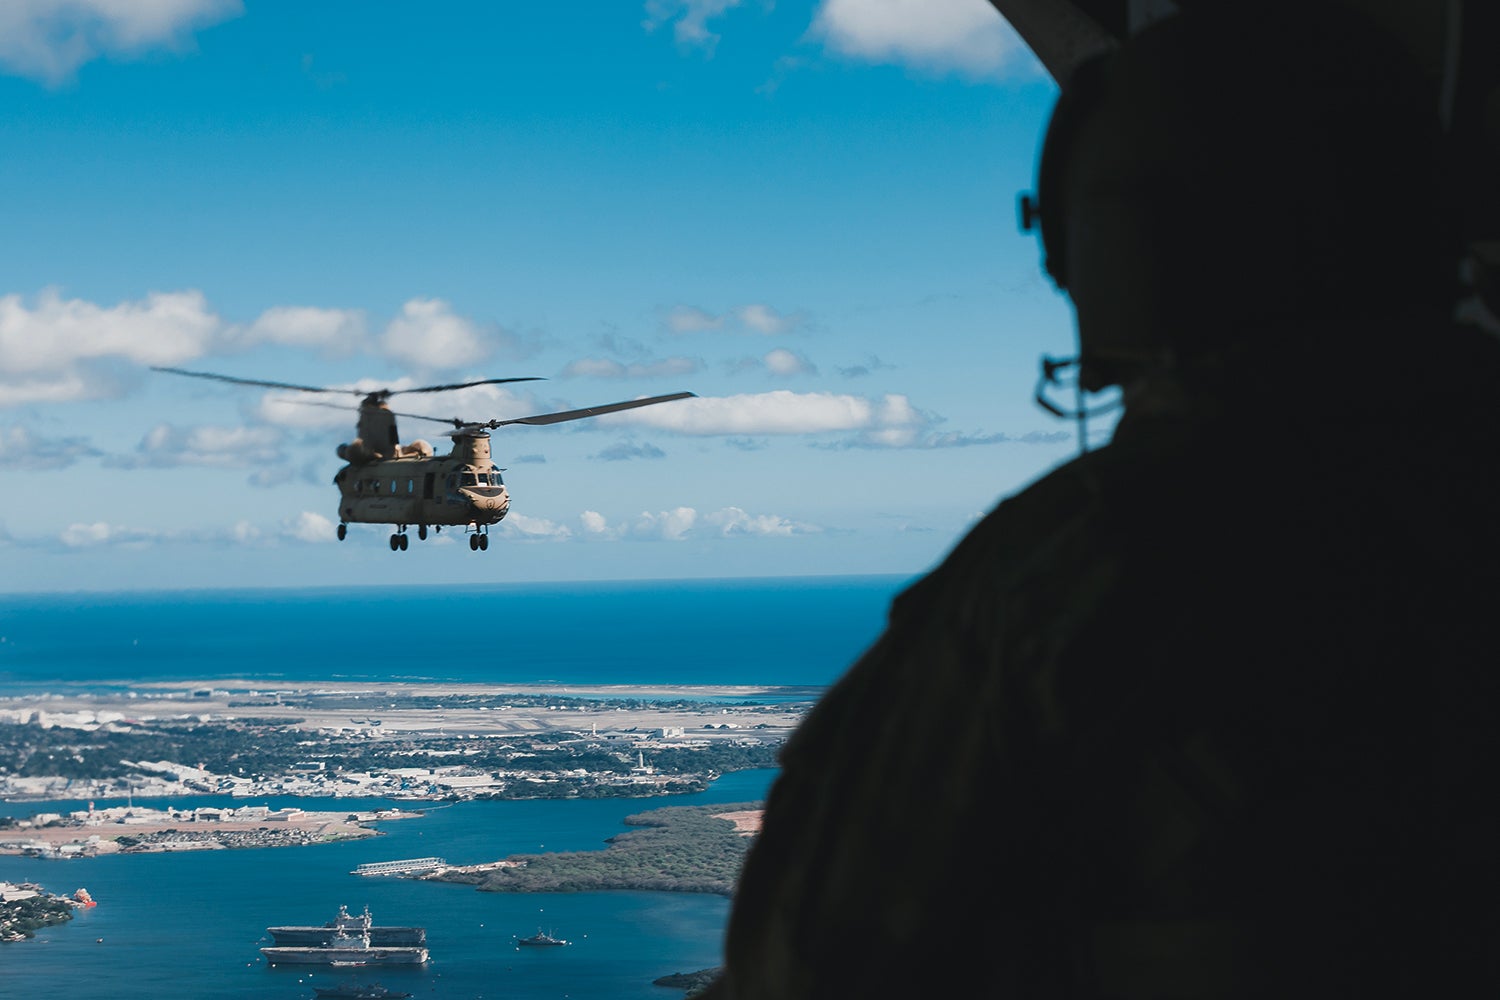 After sailing on the Somervell, soldiers return to Oahu, Hawaii, by helicopter. Here, a crew chief with the 3rd Battalion, 25th Aviation Regiment, looks out at a CH-47 Chinook over Oahu. (Credit: U.S. Army/Spc. Rachel Christensen)